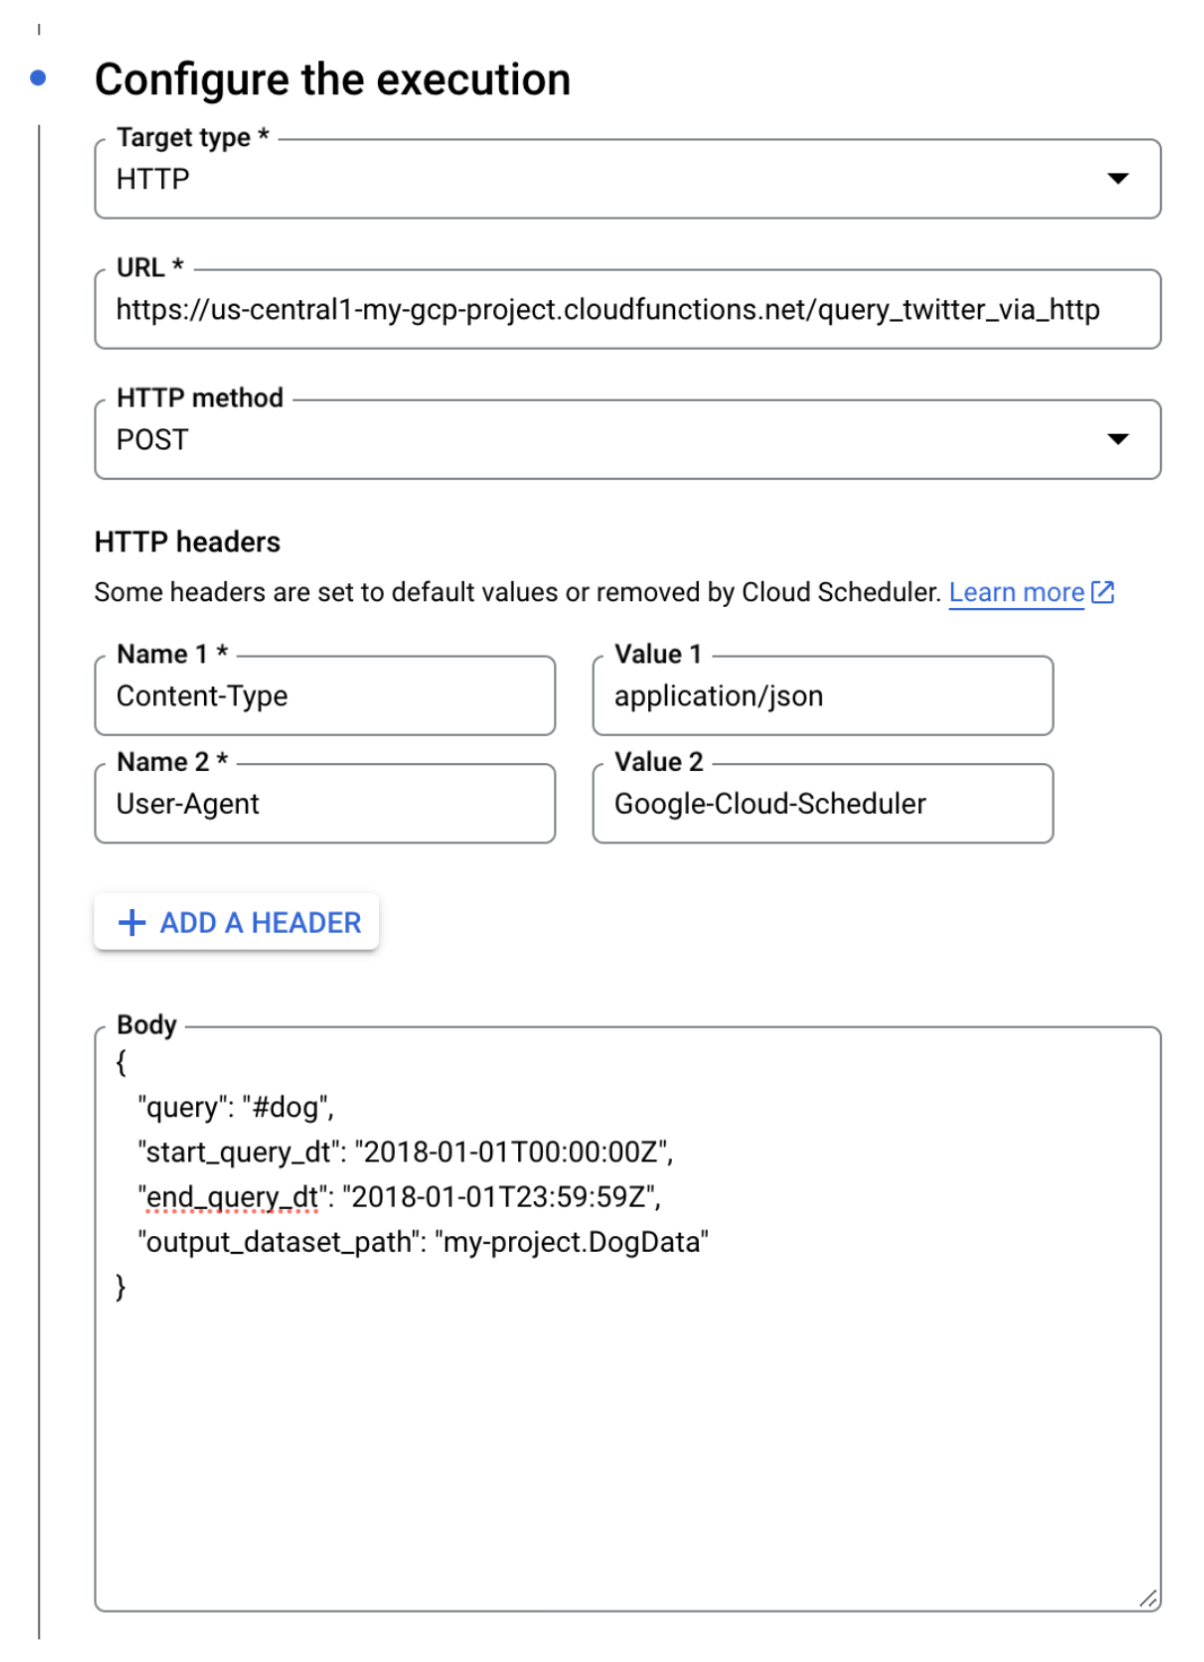 A screenshot of the google cloud scheduler configuration page, now on the "configure the execution" section. It shows a task configured to make a POST request with a JSON body with parameters like "'query': 'dog'". 